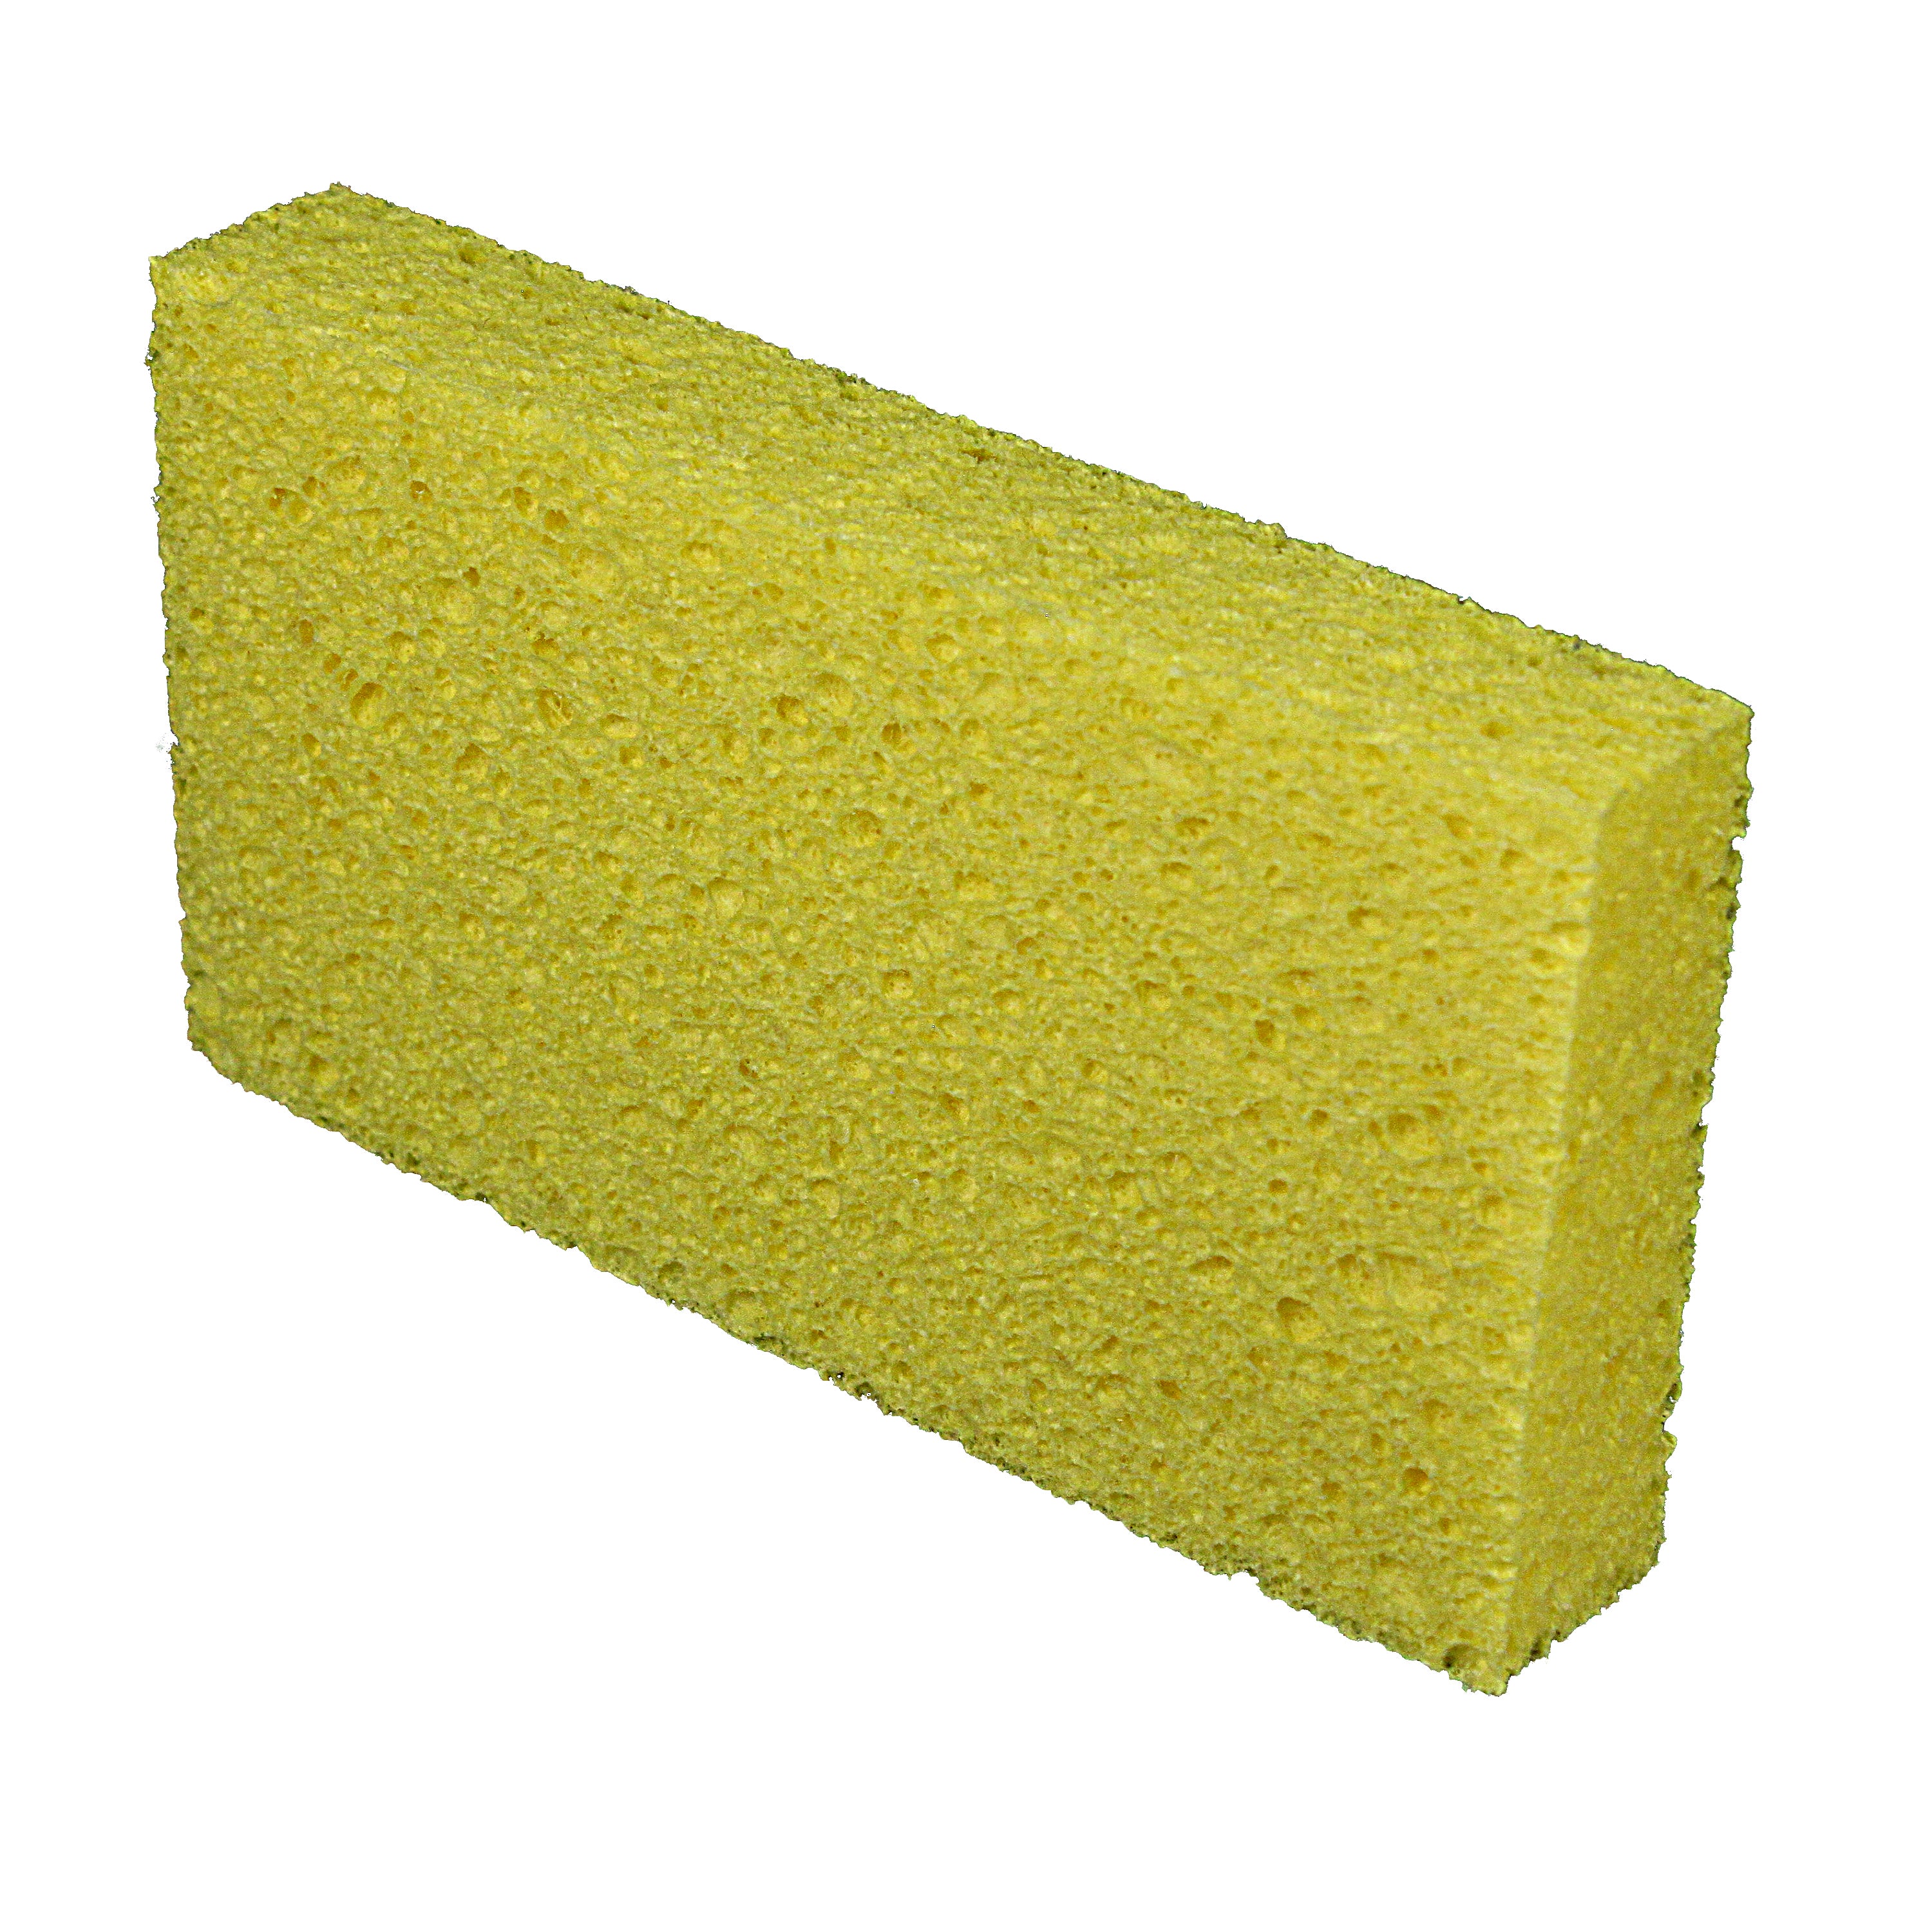 SMALL YELLOW CELLULOSE SPONGE INDIVIDUALLY WRAPPED 24/CS